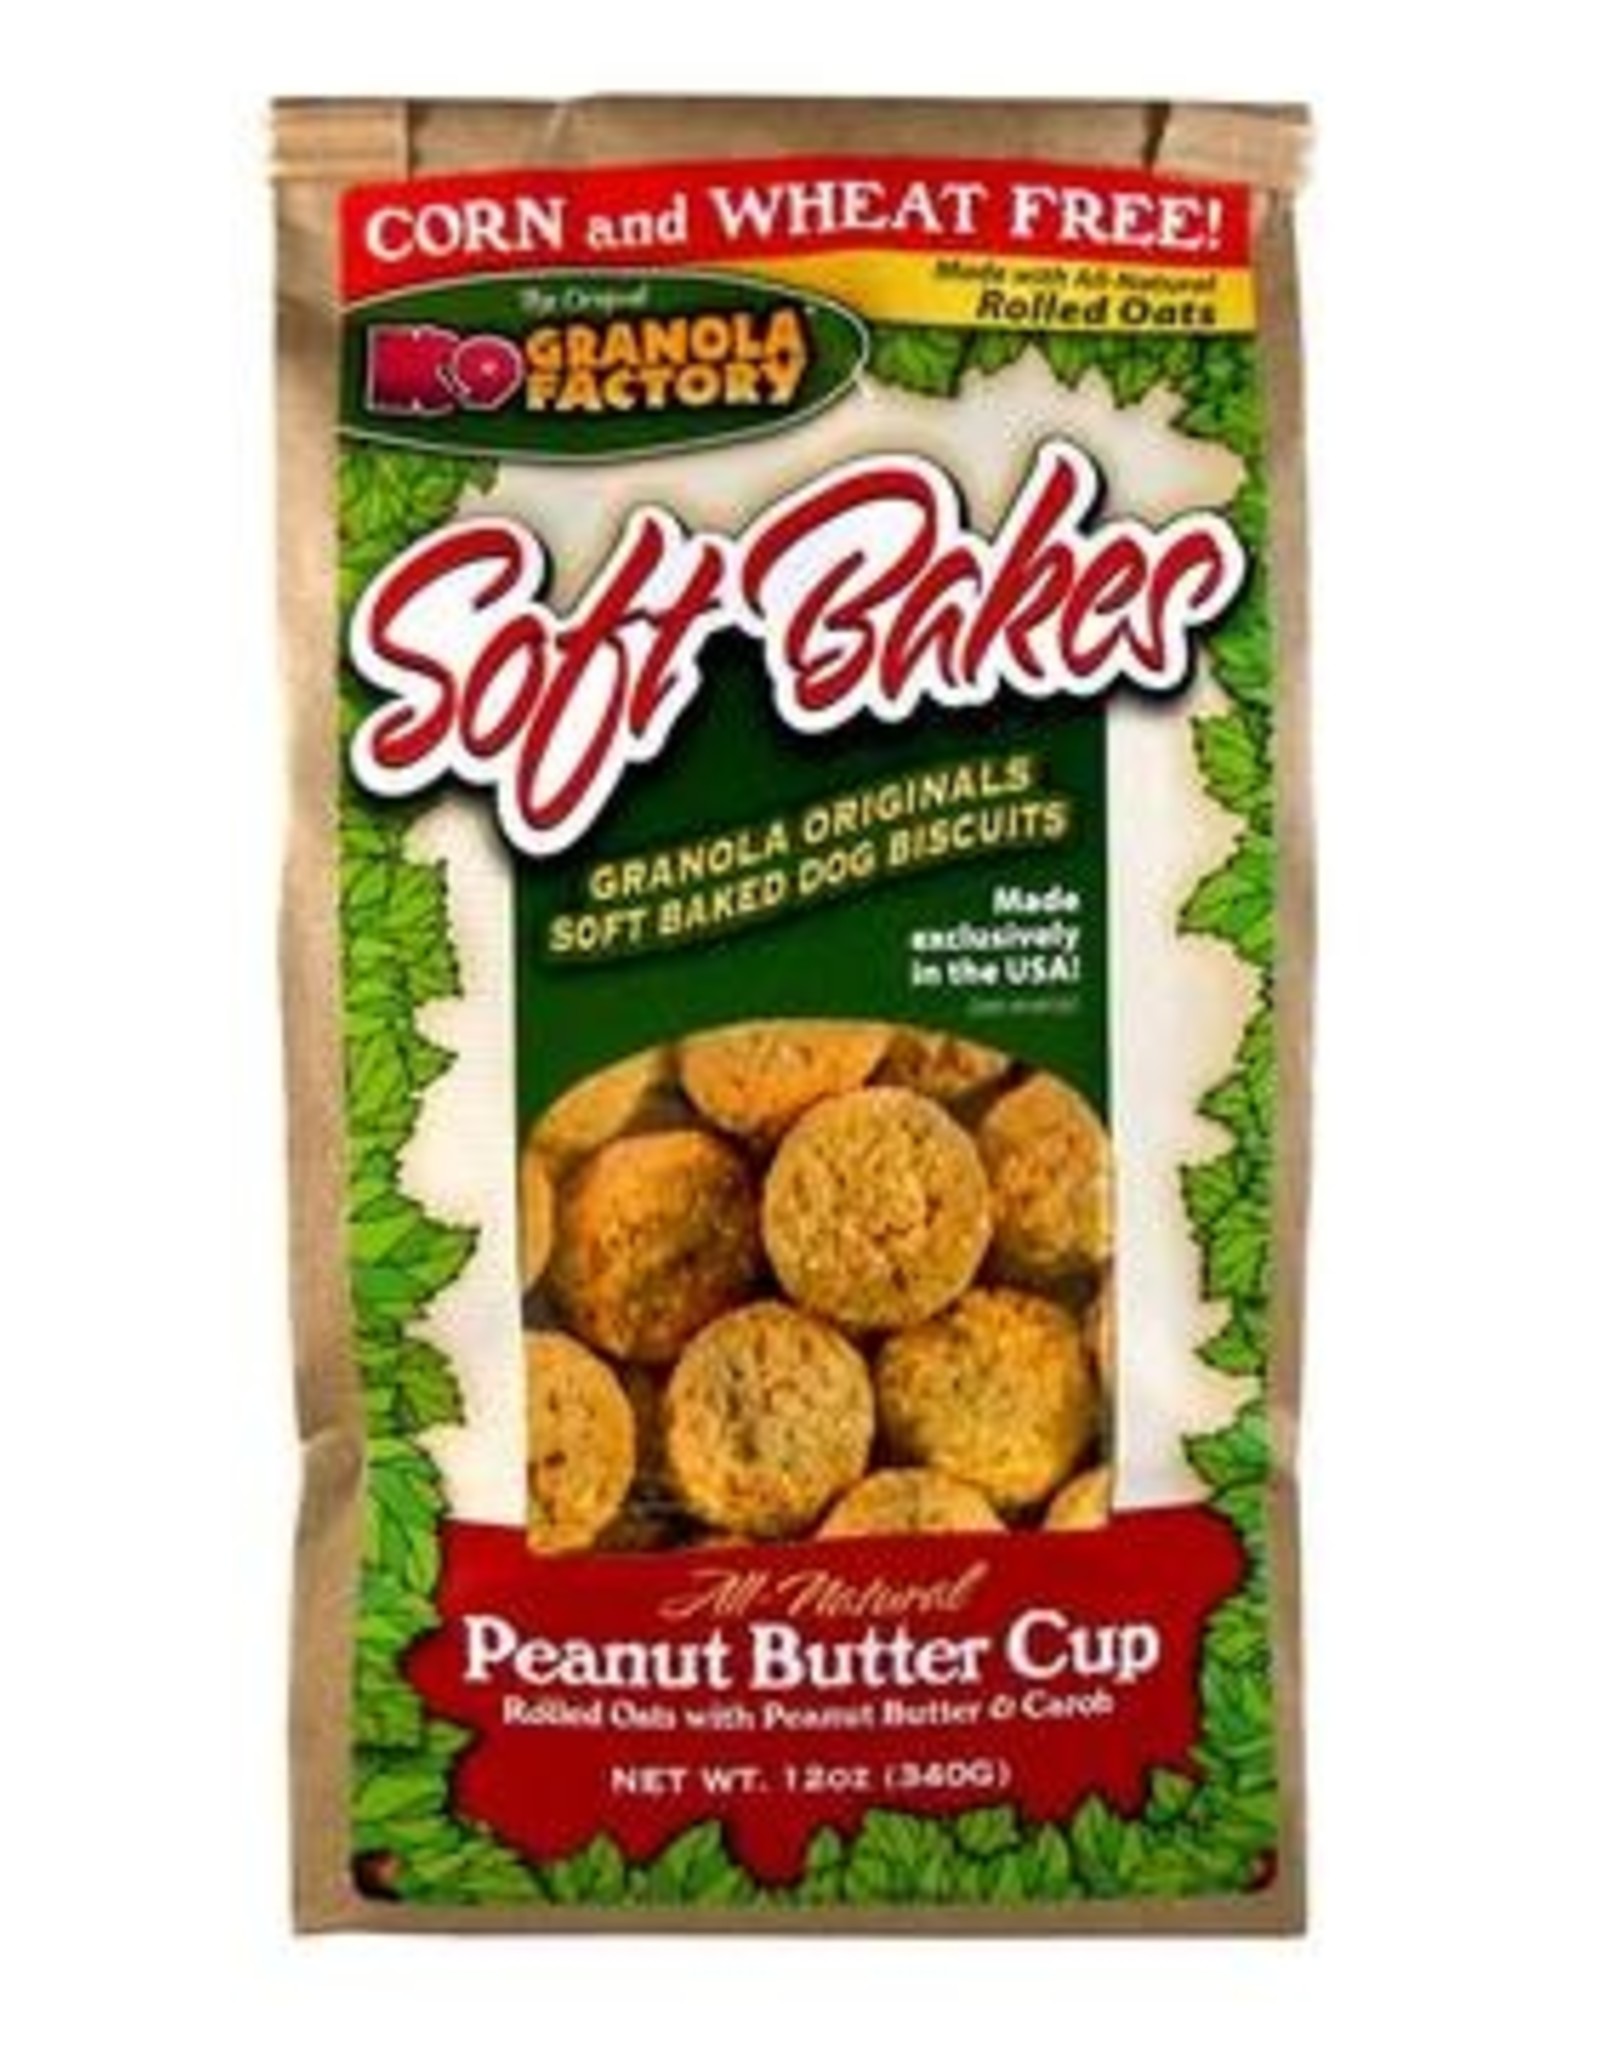 K9 GRANOLA FACTORY K9 GRANOLA FACTORY BISCUITS SOFT BAKES PEANUT BUTTER CUP 12OZ